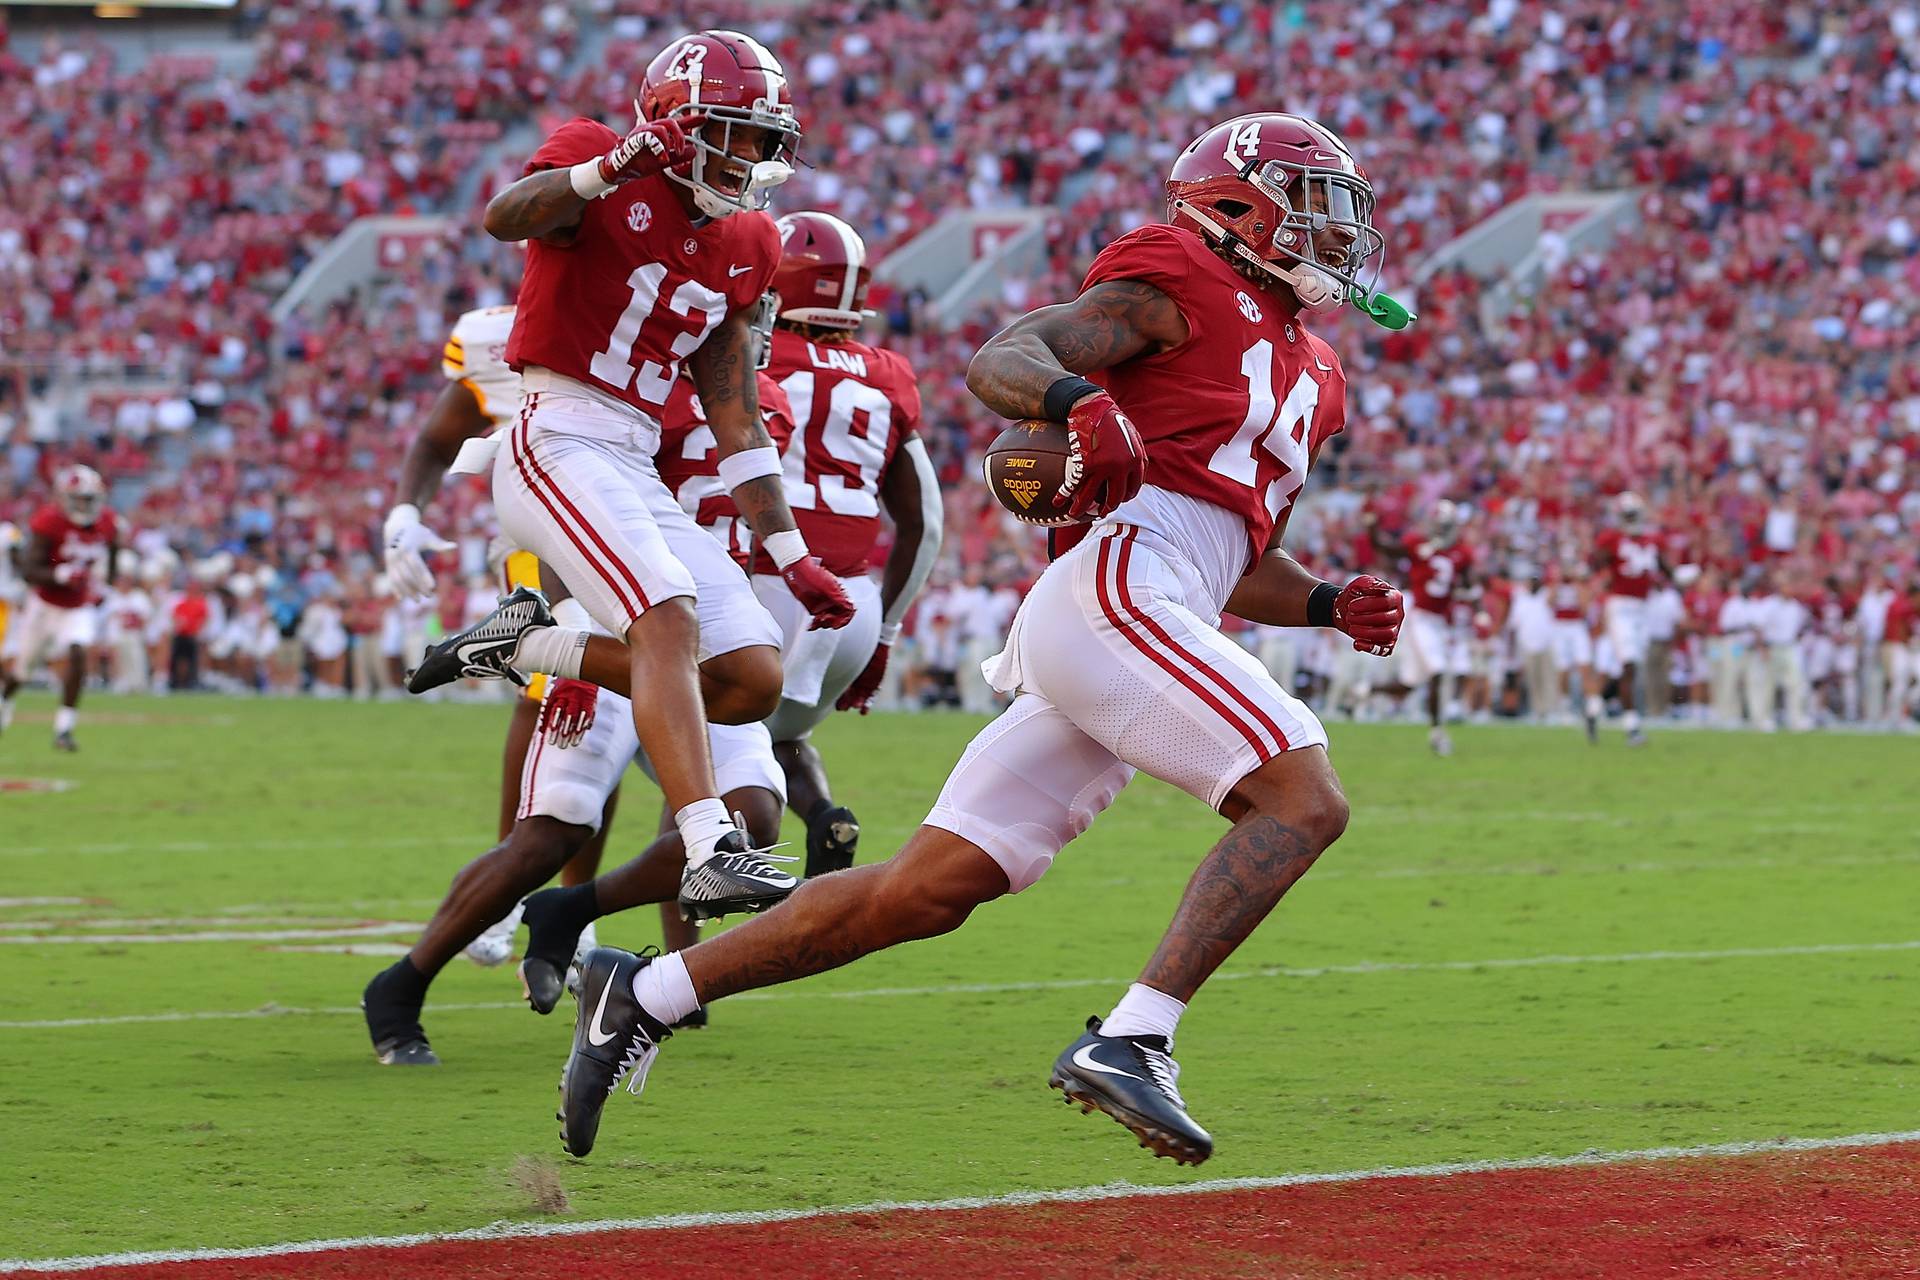 TUSCALOOSA, ALABAMA - SEPTEMBER 17:  Brian Branch #14 of the Alabama Crimson Tide returns this punt for a touchdown against the Louisiana Monroe Warhawks during the fourth quarter at Bryant-Denny Stadium on September 17, 2022 in Tuscaloosa, Alabama.